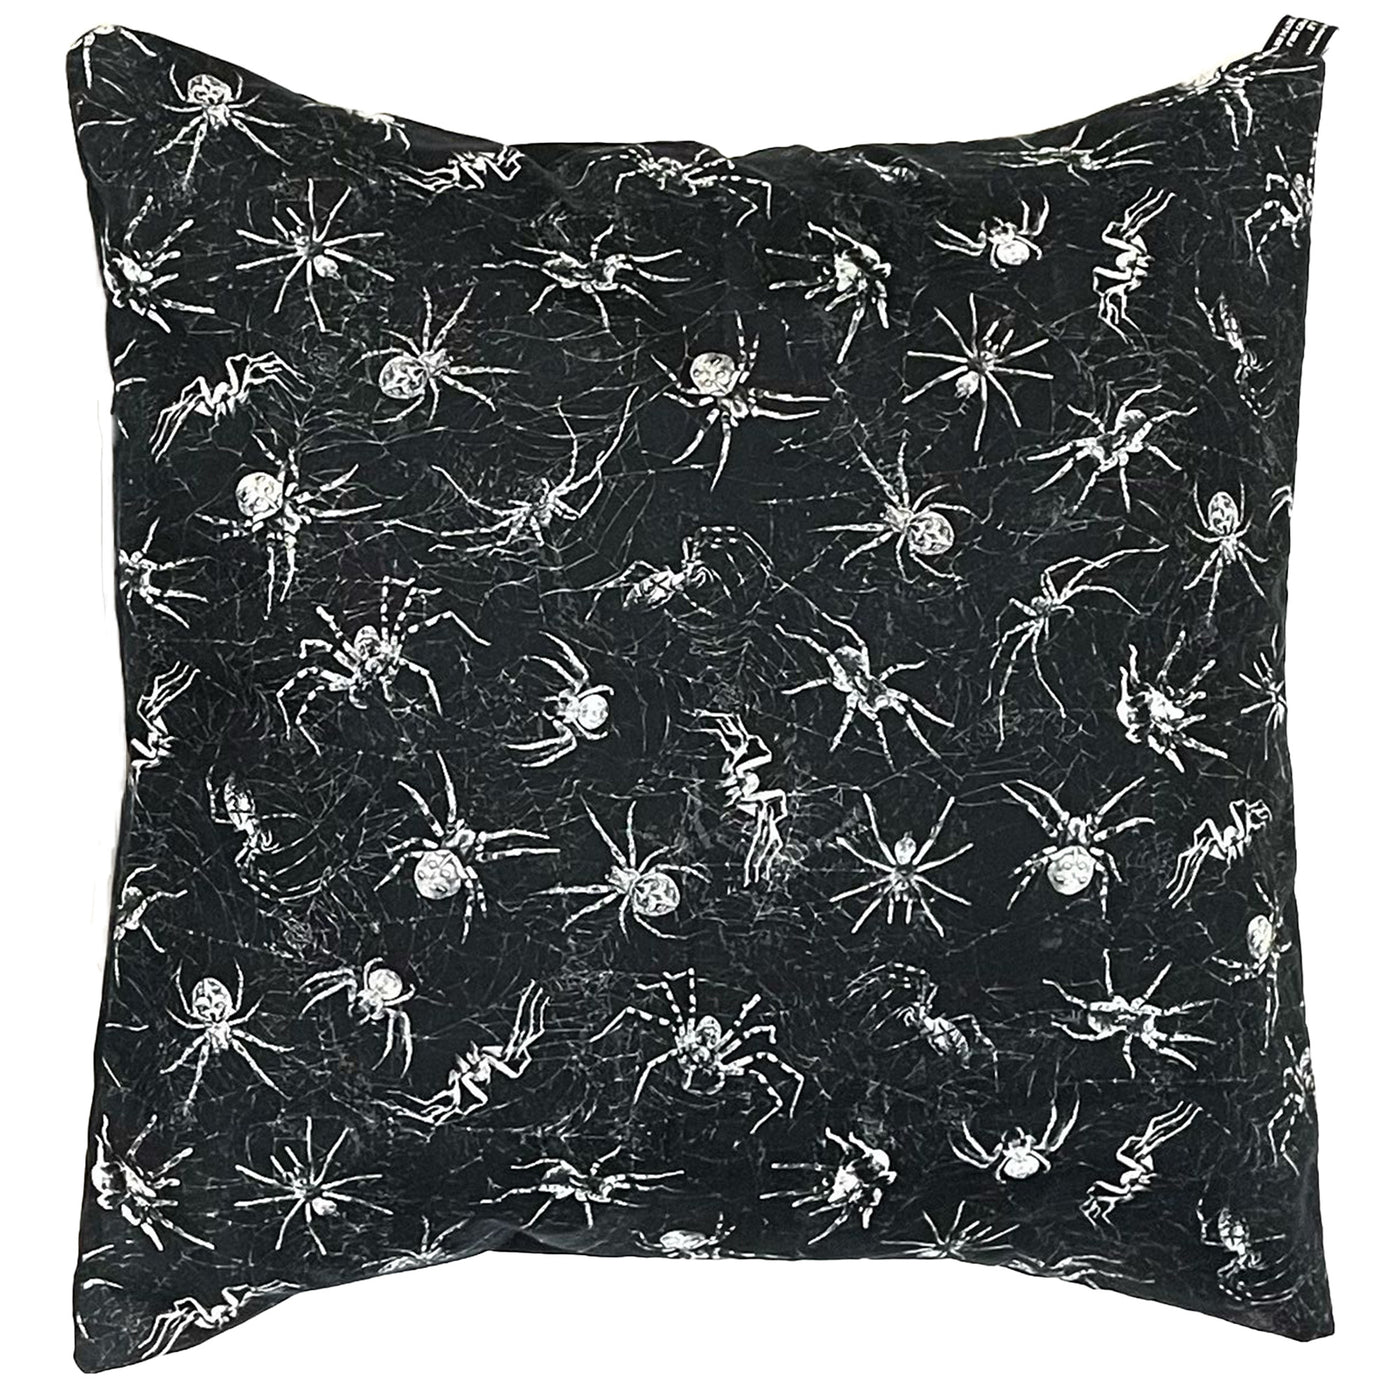 Spider Cushion Cover